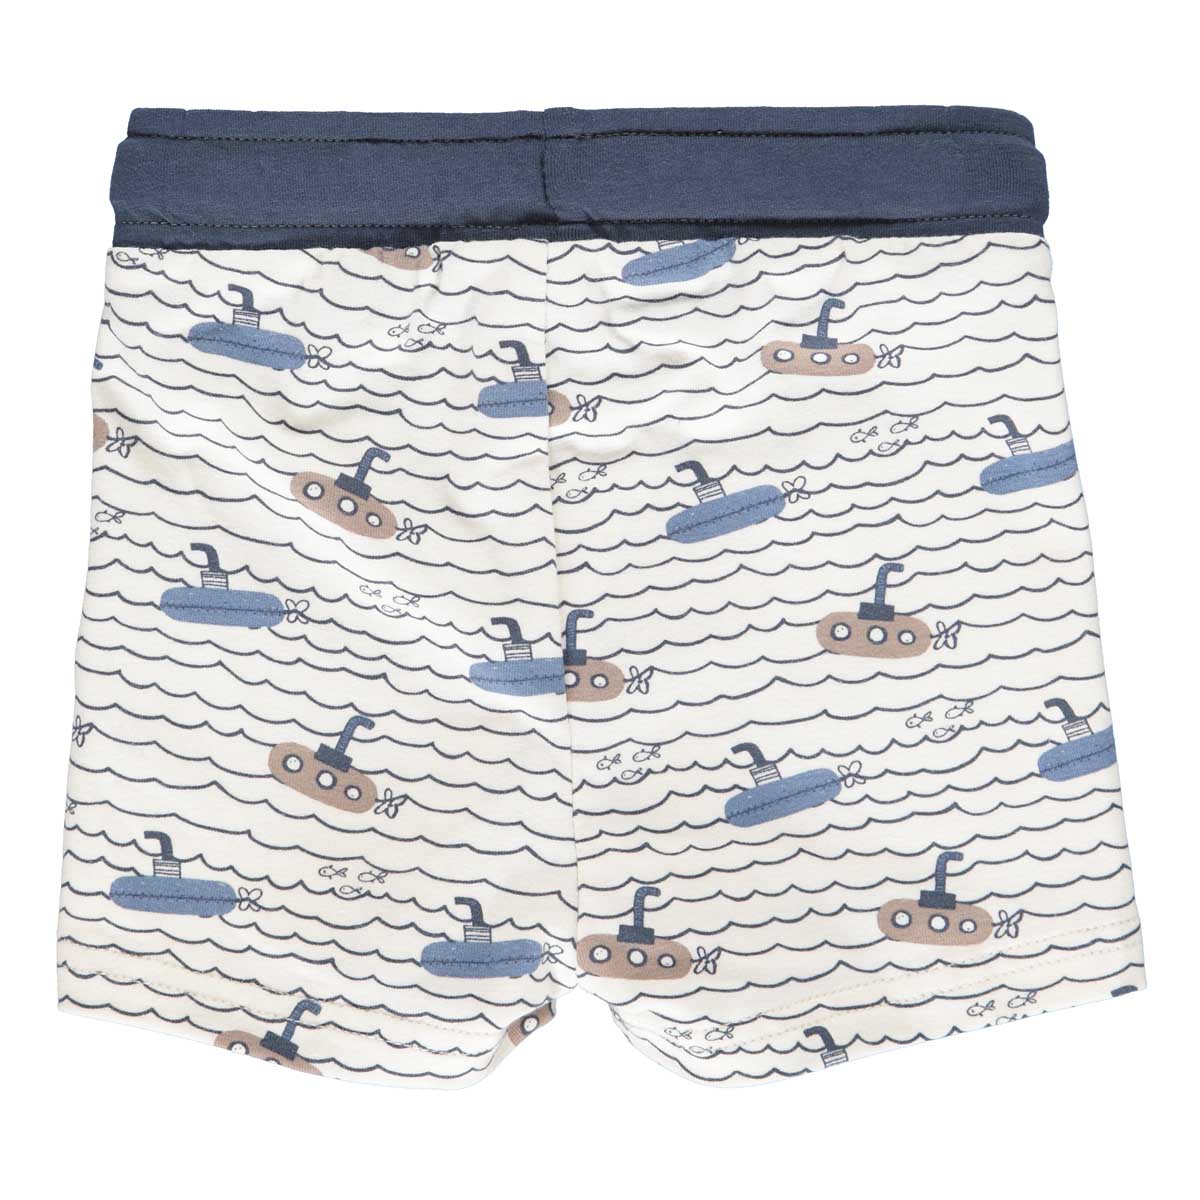 Shorts Boote Fred s World